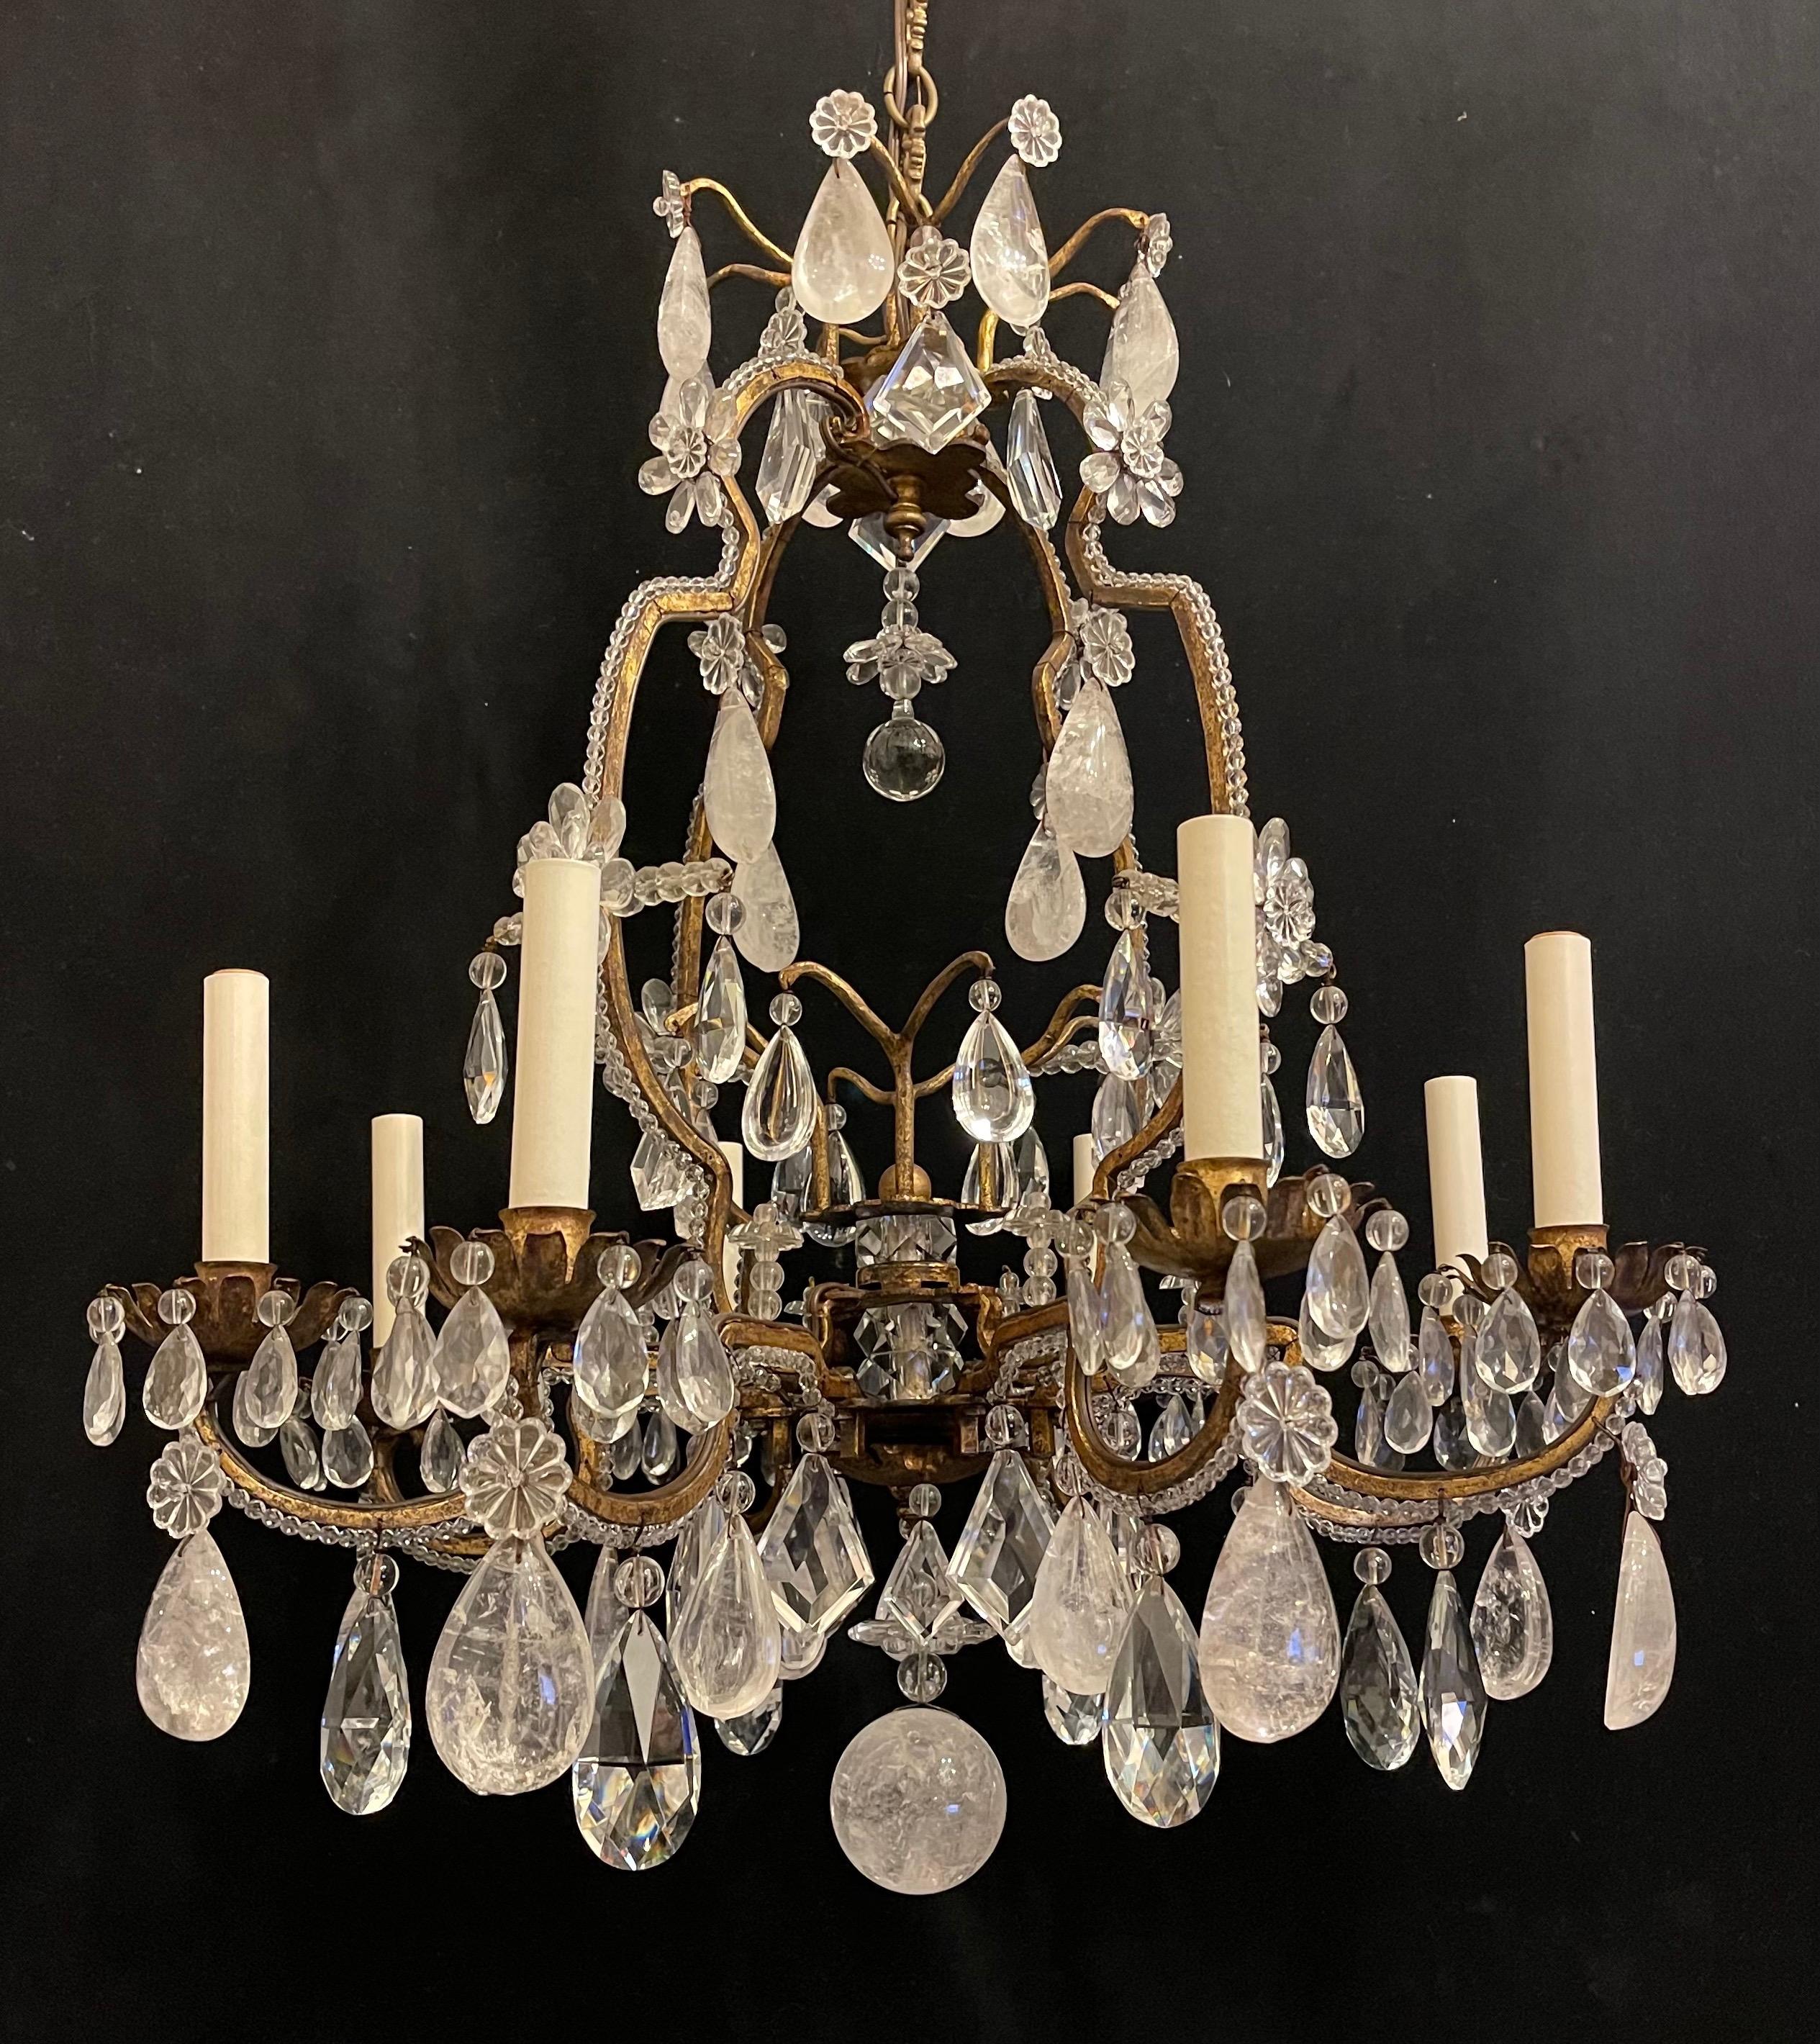 A Wonderful French Maison Baguès Louis XV style rock crystal, crystal beaded and flower 8 candelabra light chandelier in the manner of Maison Jansen.
Accompanied with chain canopy and mounting hardware for installation.